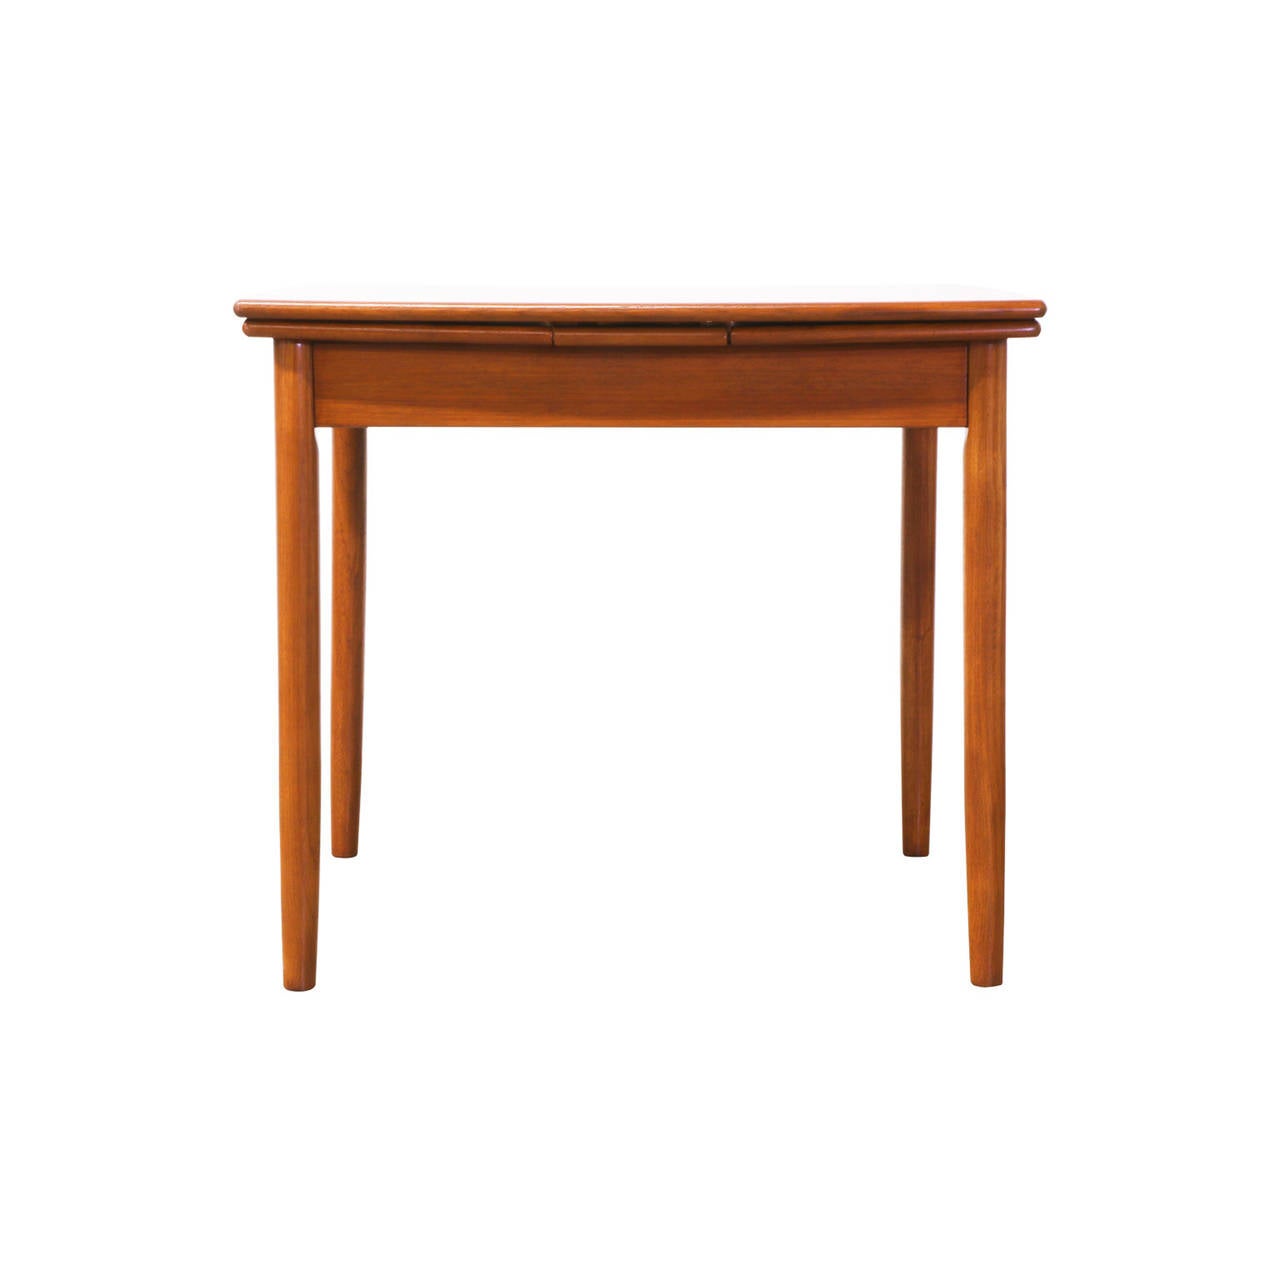 Designer: Unknown
Manufacturer: Unknown
Period/Style: Danish Modern
Country: Denmark
Date: 1960’s

Dimensions: 29″H x 3.5″W x 33.5″W
Extension Leaves 12.5″
Total Extension 58.5″
Materials: Teak
Condition: Excellent – Newly